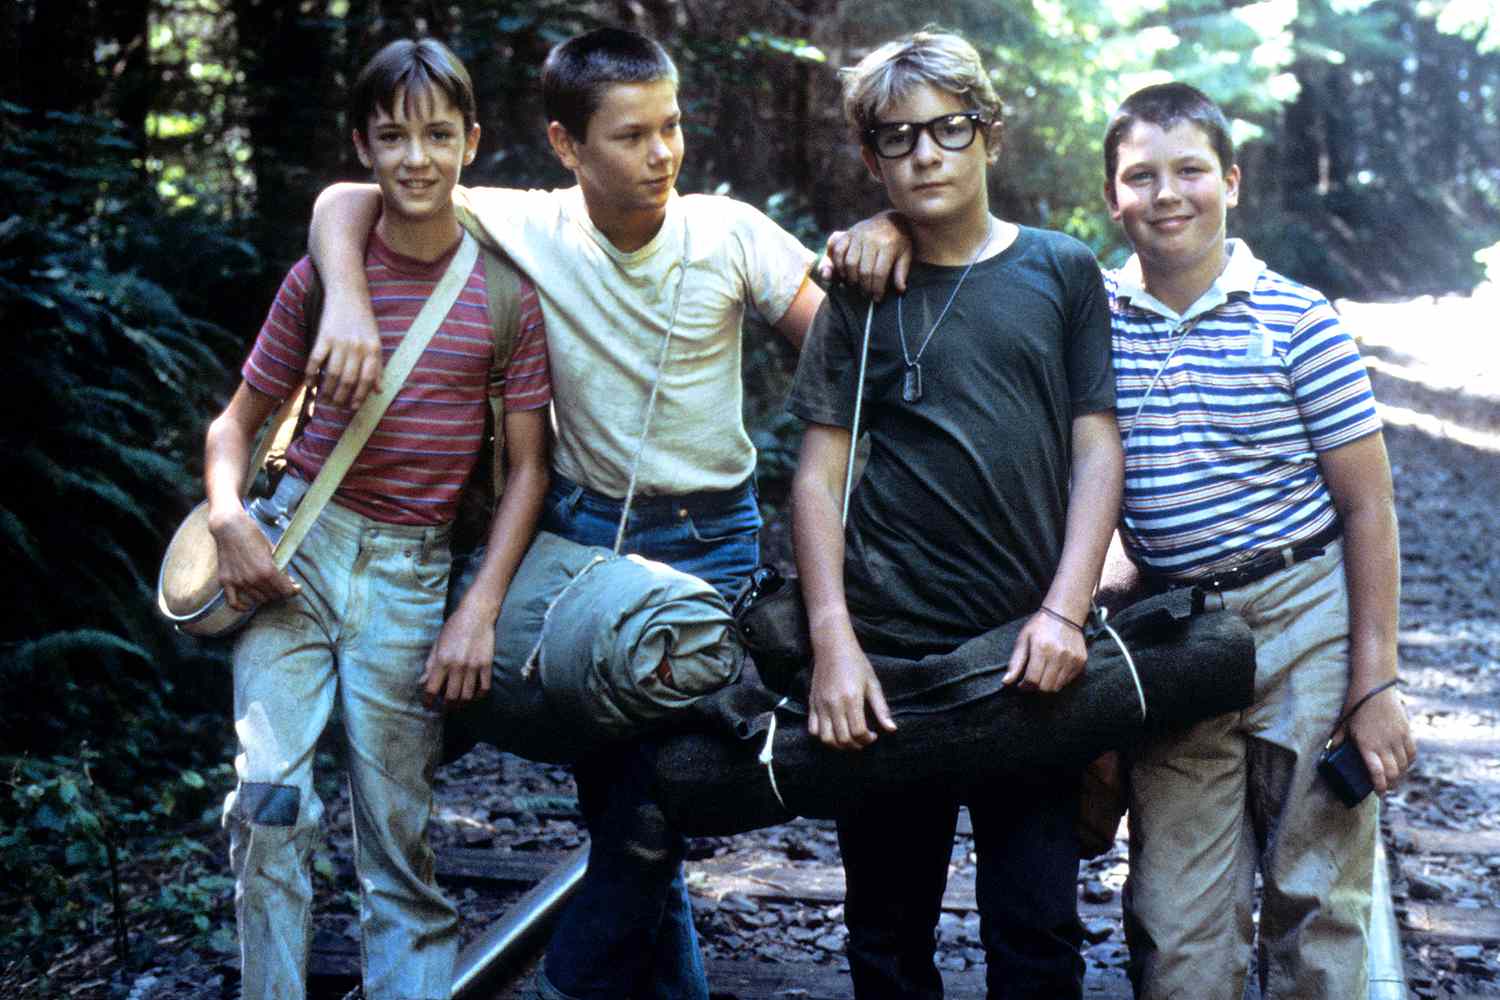 Wil Wheaton, River Phoenix, Corey Feldman, and Jerry O'Connell in 'Stand by Me'